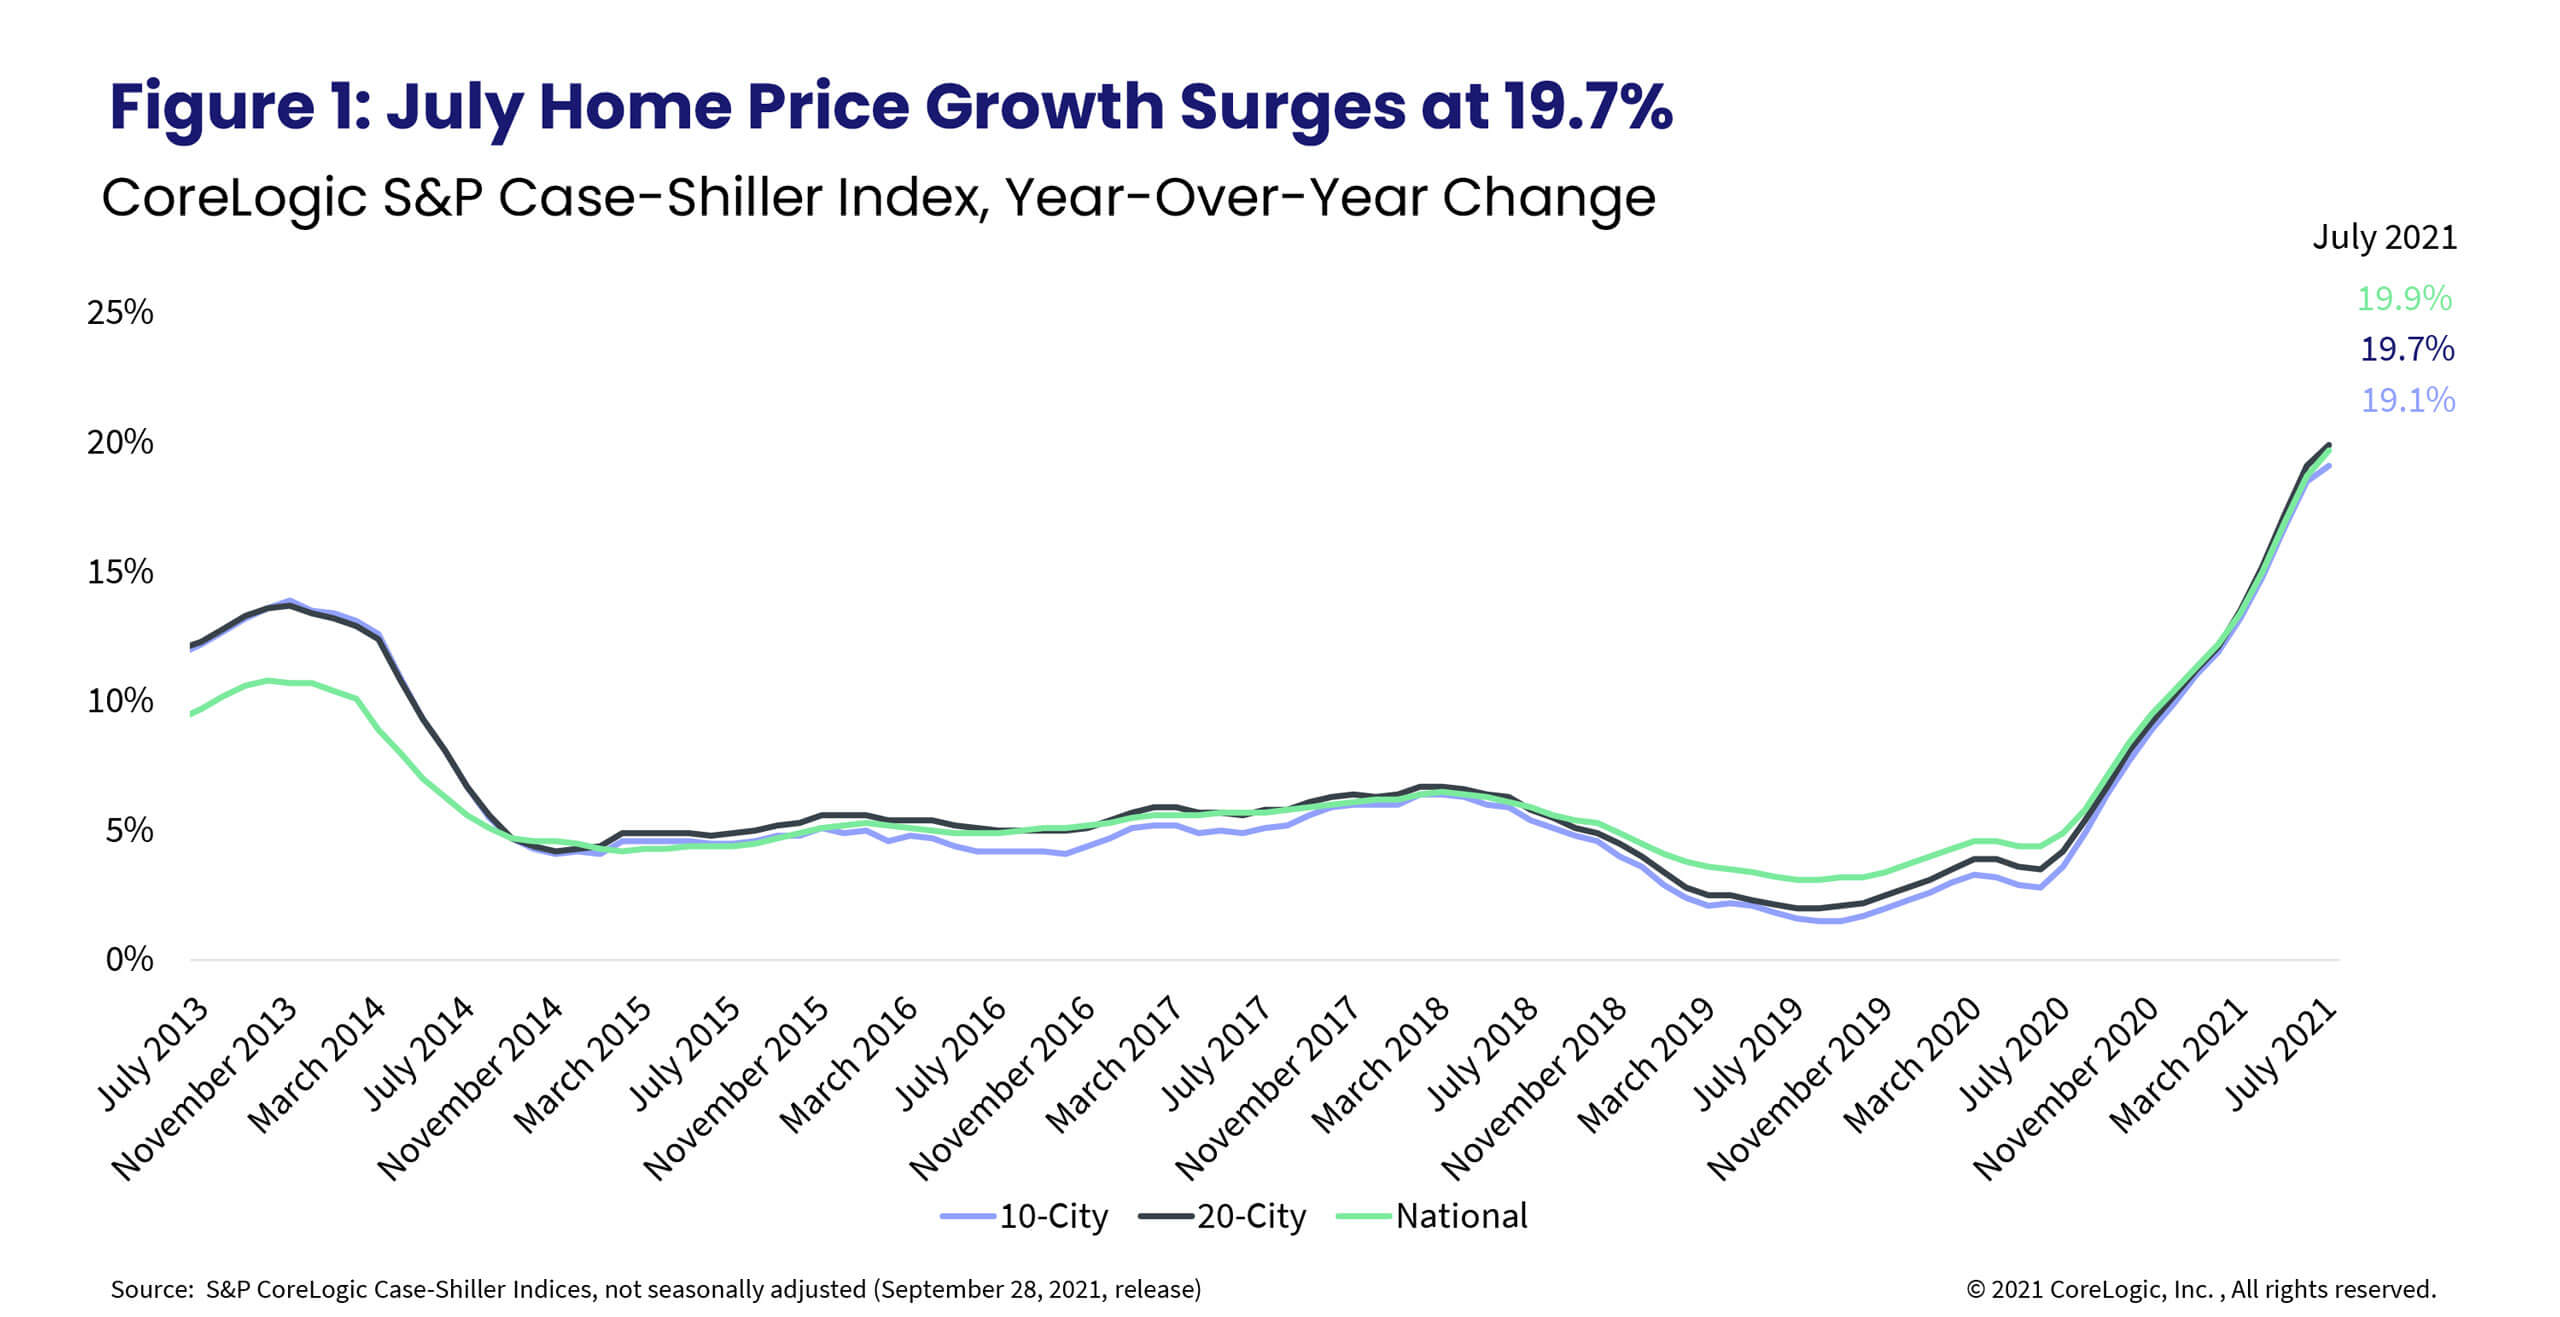 Figure 1: July Home Price Growth Surges at 19.7%